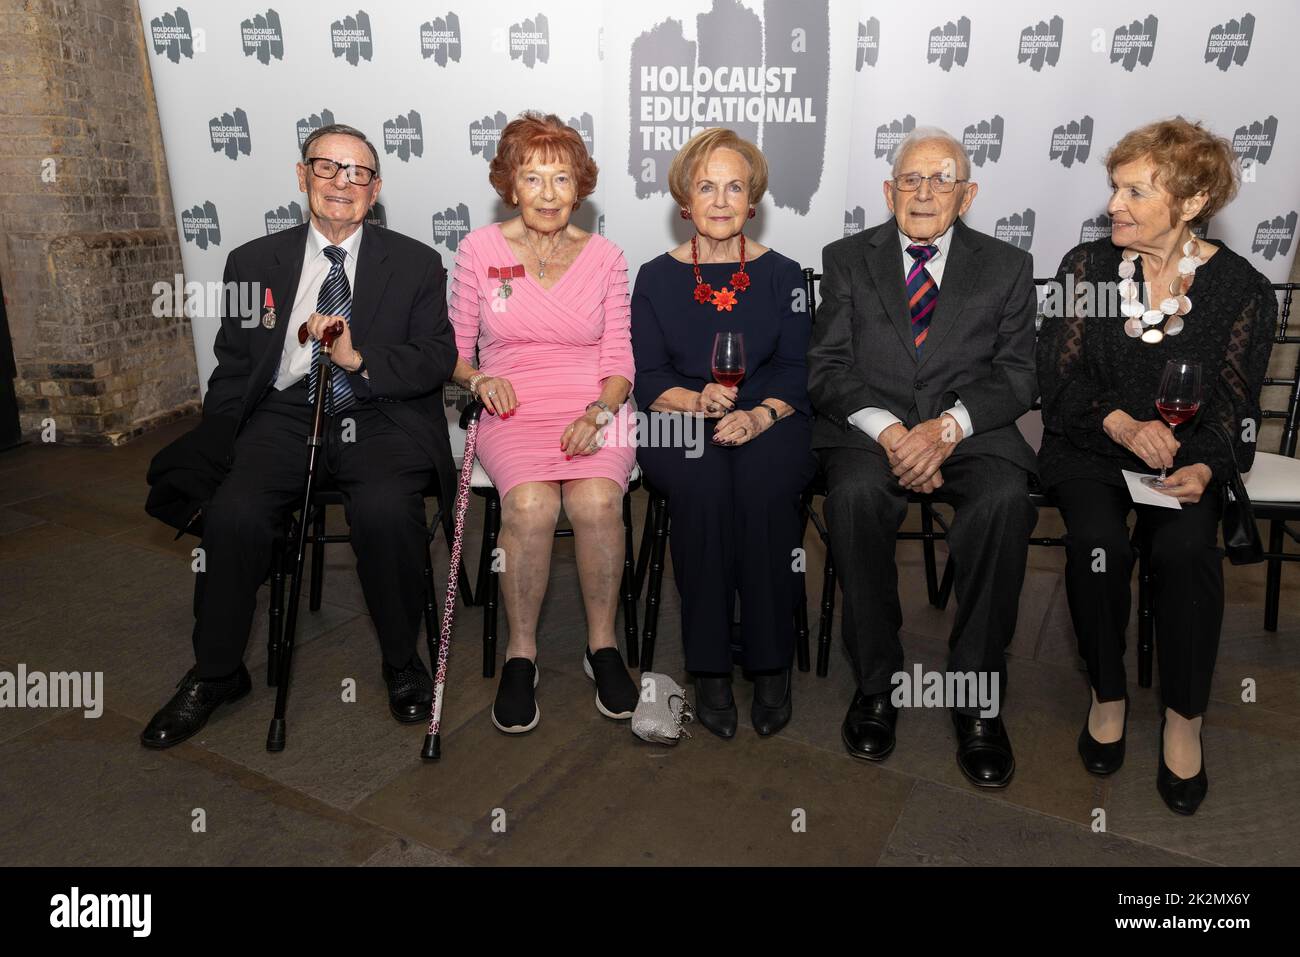 Kwasi Kwarteng, Chancellor of the Exchequer with Holocaust survivors at the HET annual dinner, The Roundhouse. 20th September 2022 Stock Photo